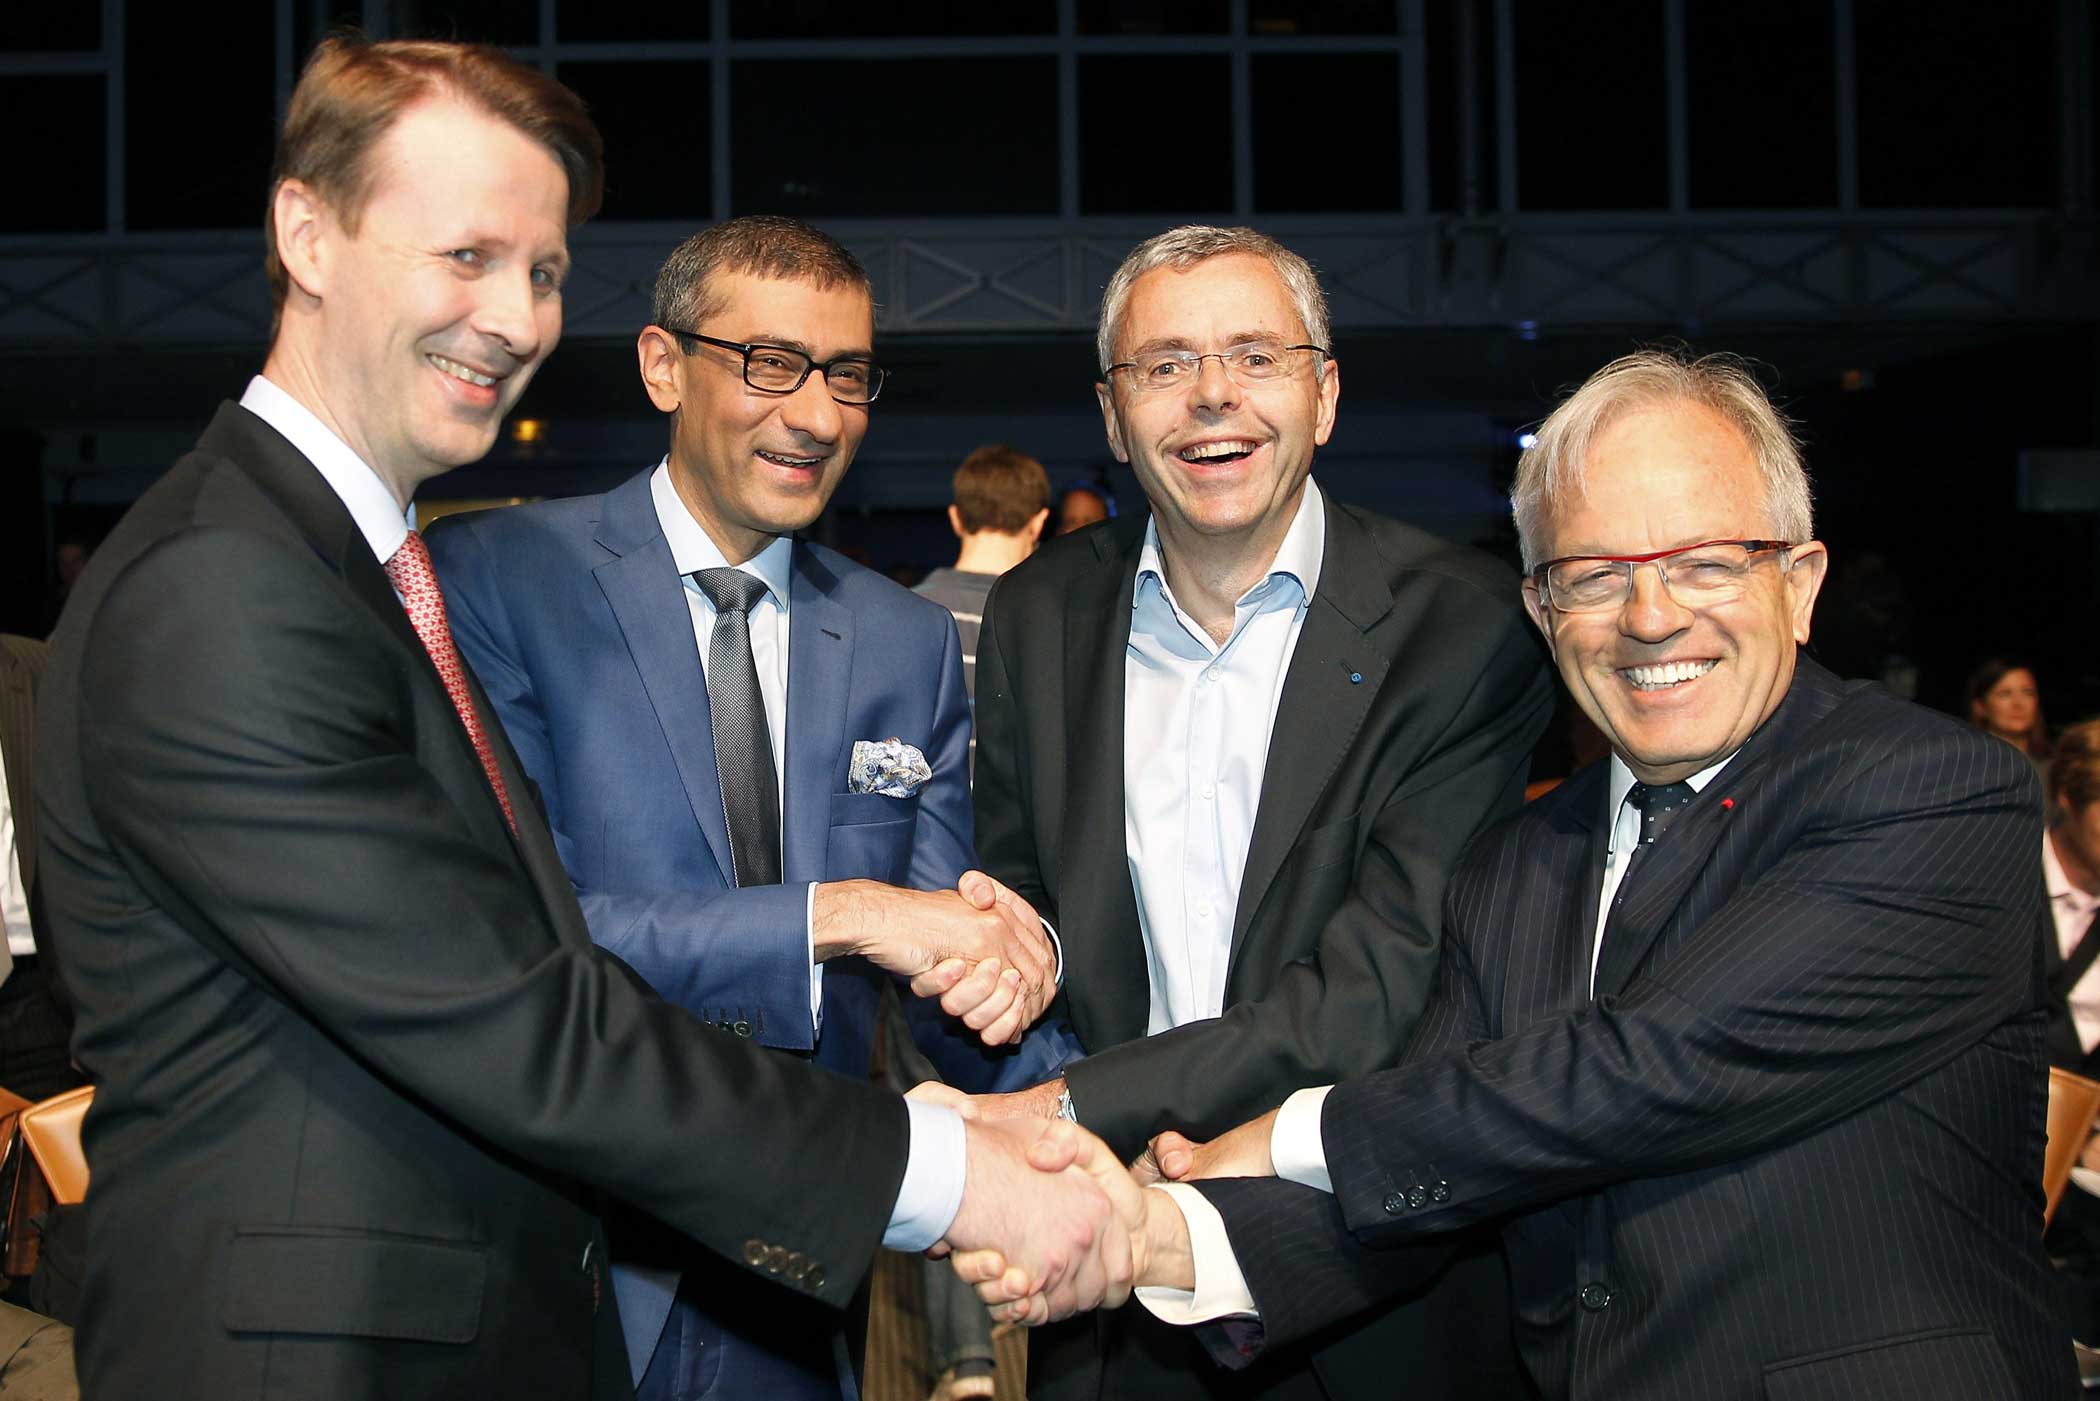 Nokia's chairman Risto Siilasmaa, Nokia's Chief Executive Rajeev Suri, telecommunications company Alcatel-Lucent's Chief Executive Officer Michel Combes and Alcatel-Lucent's chairman of the supervisory board Philippe Camus shake hands prior a press conference on April 15, 2015 in Paris. (Chesnot—Getty Images)